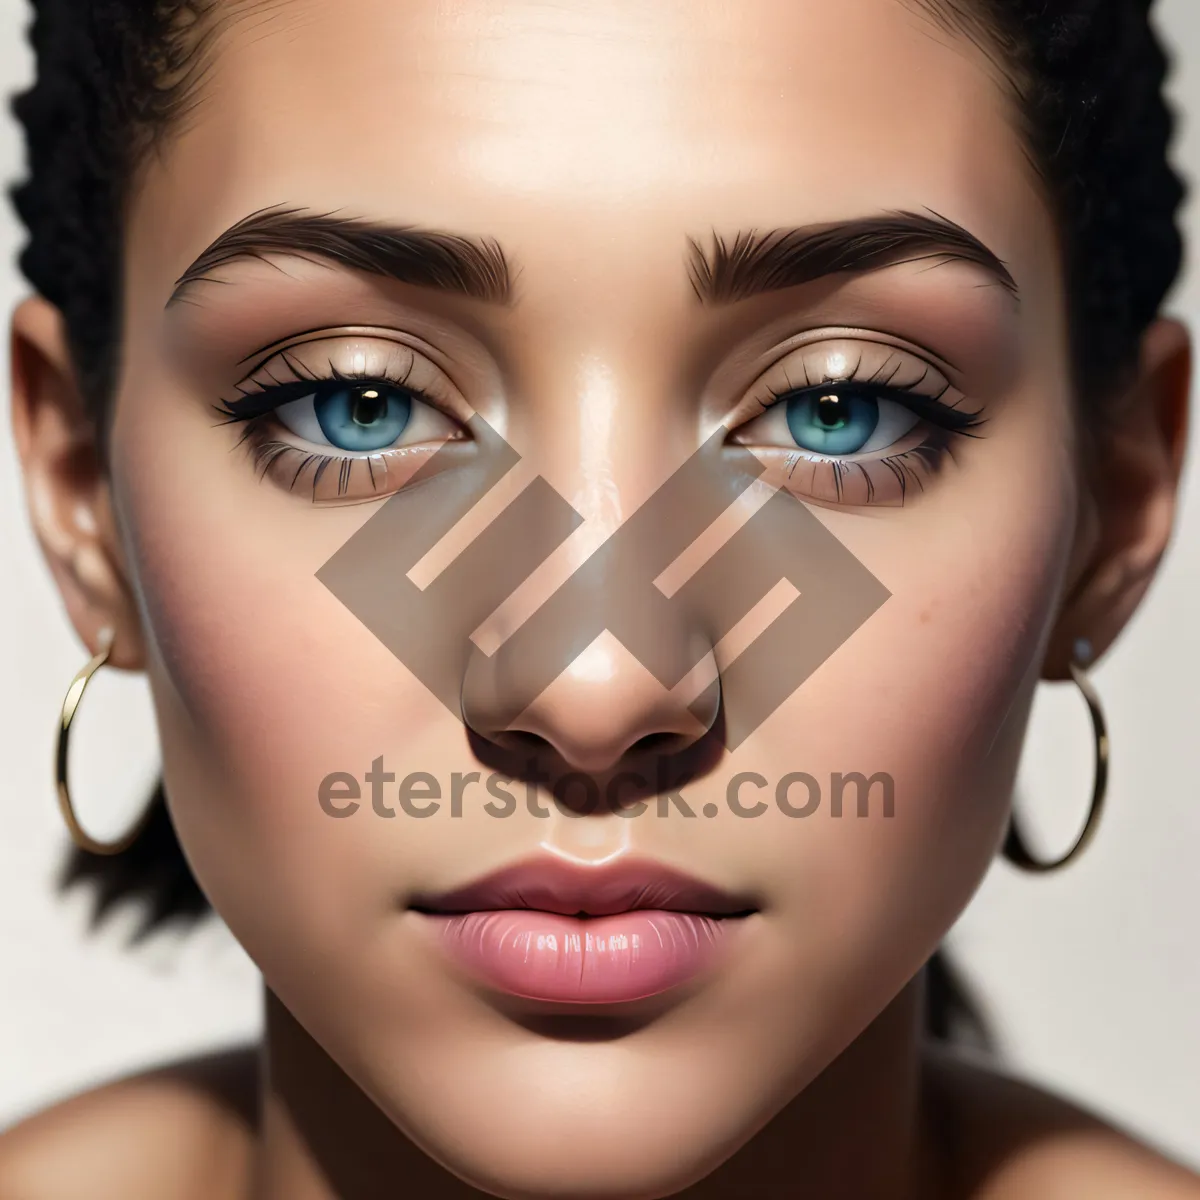 Picture of Flawless beauty: Attractive portrait showcasing flawless skin and captivating eyes.